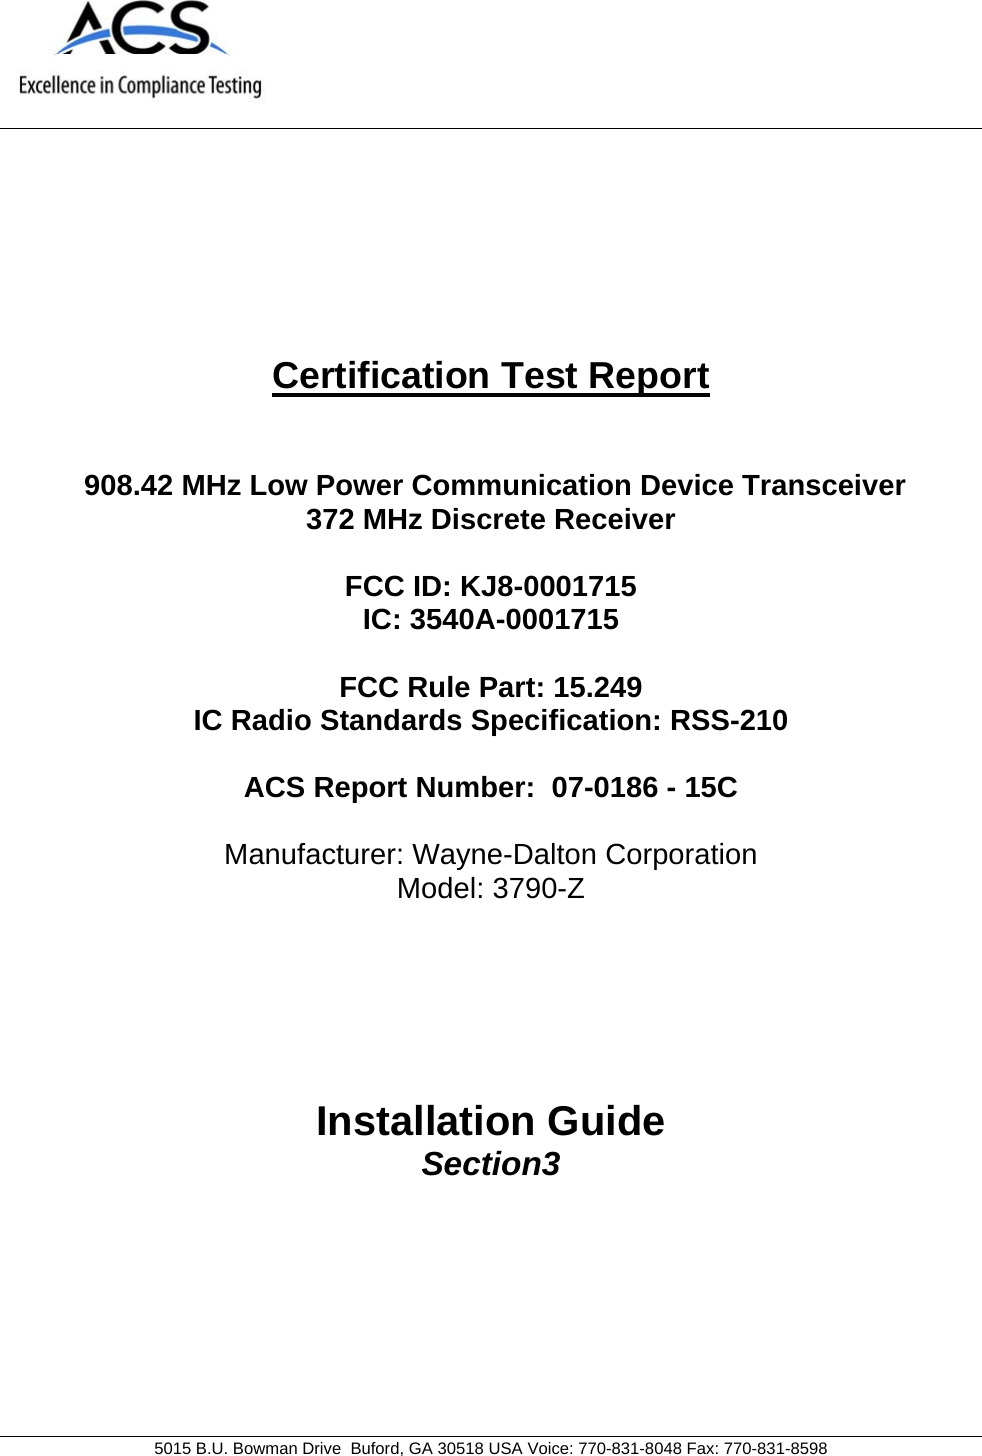     5015 B.U. Bowman Drive  Buford, GA 30518 USA Voice: 770-831-8048 Fax: 770-831-8598   Certification Test Report    908.42 MHz Low Power Communication Device Transceiver 372 MHz Discrete Receiver  FCC ID: KJ8-0001715  IC: 3540A-0001715  FCC Rule Part: 15.249 IC Radio Standards Specification: RSS-210  ACS Report Number:  07-0186 - 15C   Manufacturer: Wayne-Dalton Corporation Model: 3790-Z     Installation Guide Section3  